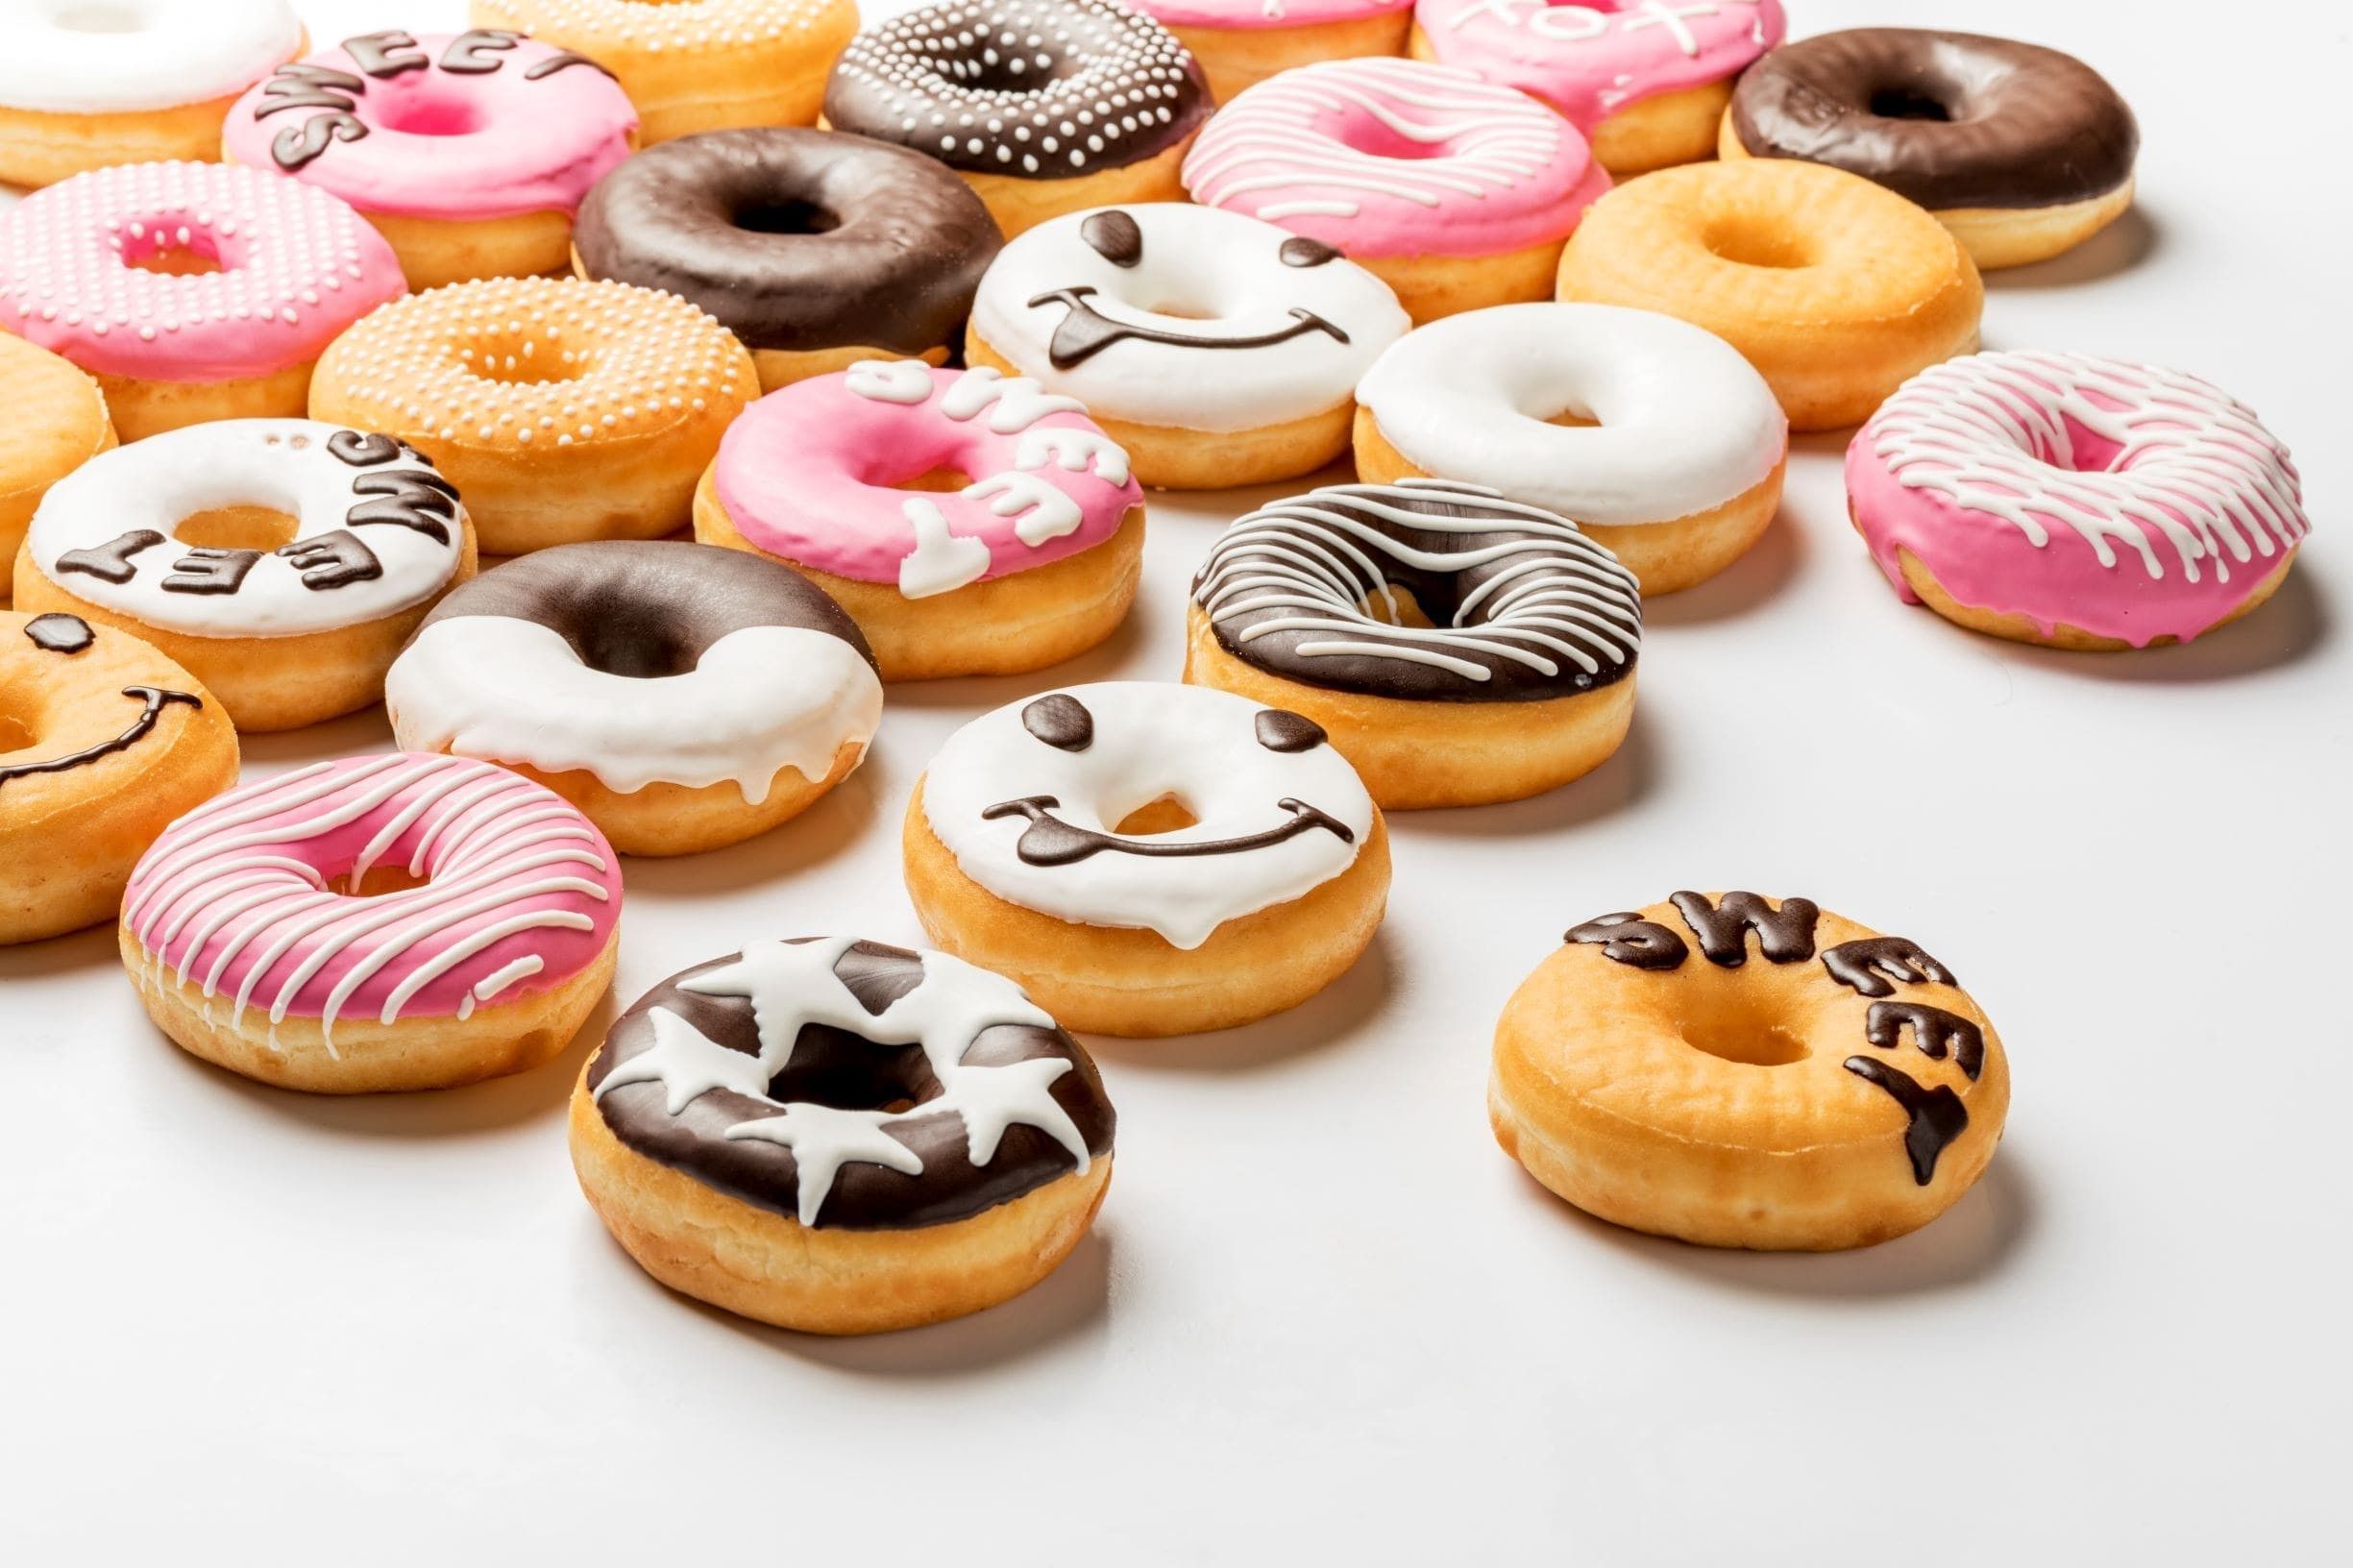 Donuts decorated with chocolate